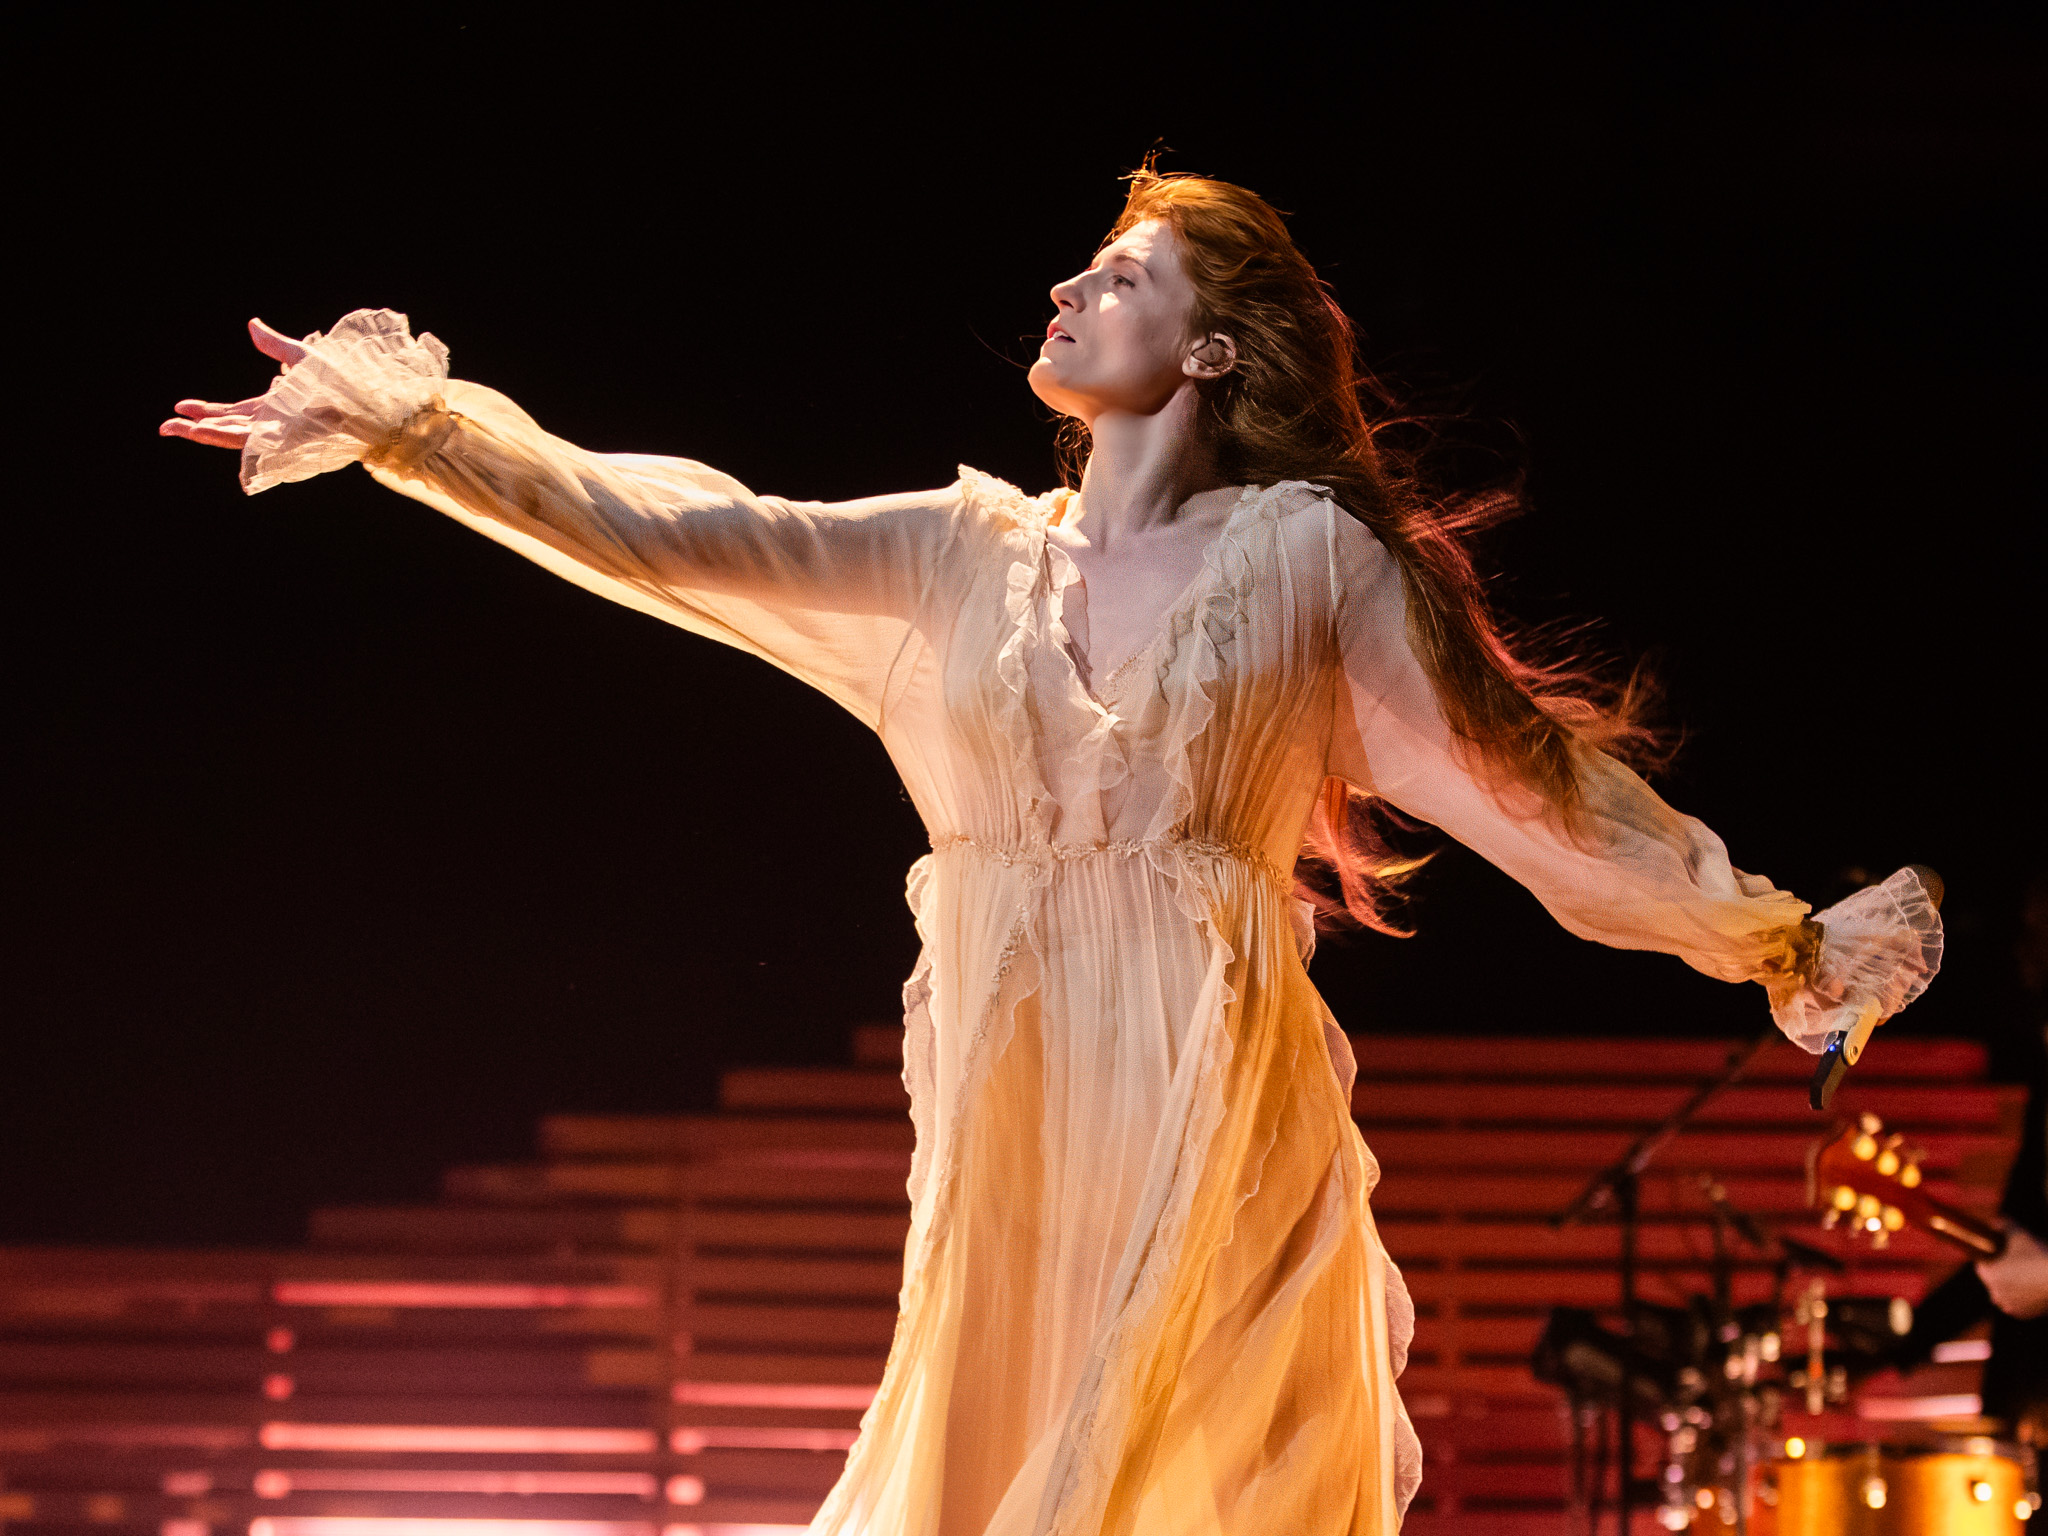 Florence + the Machine by Bullet-ray Photography